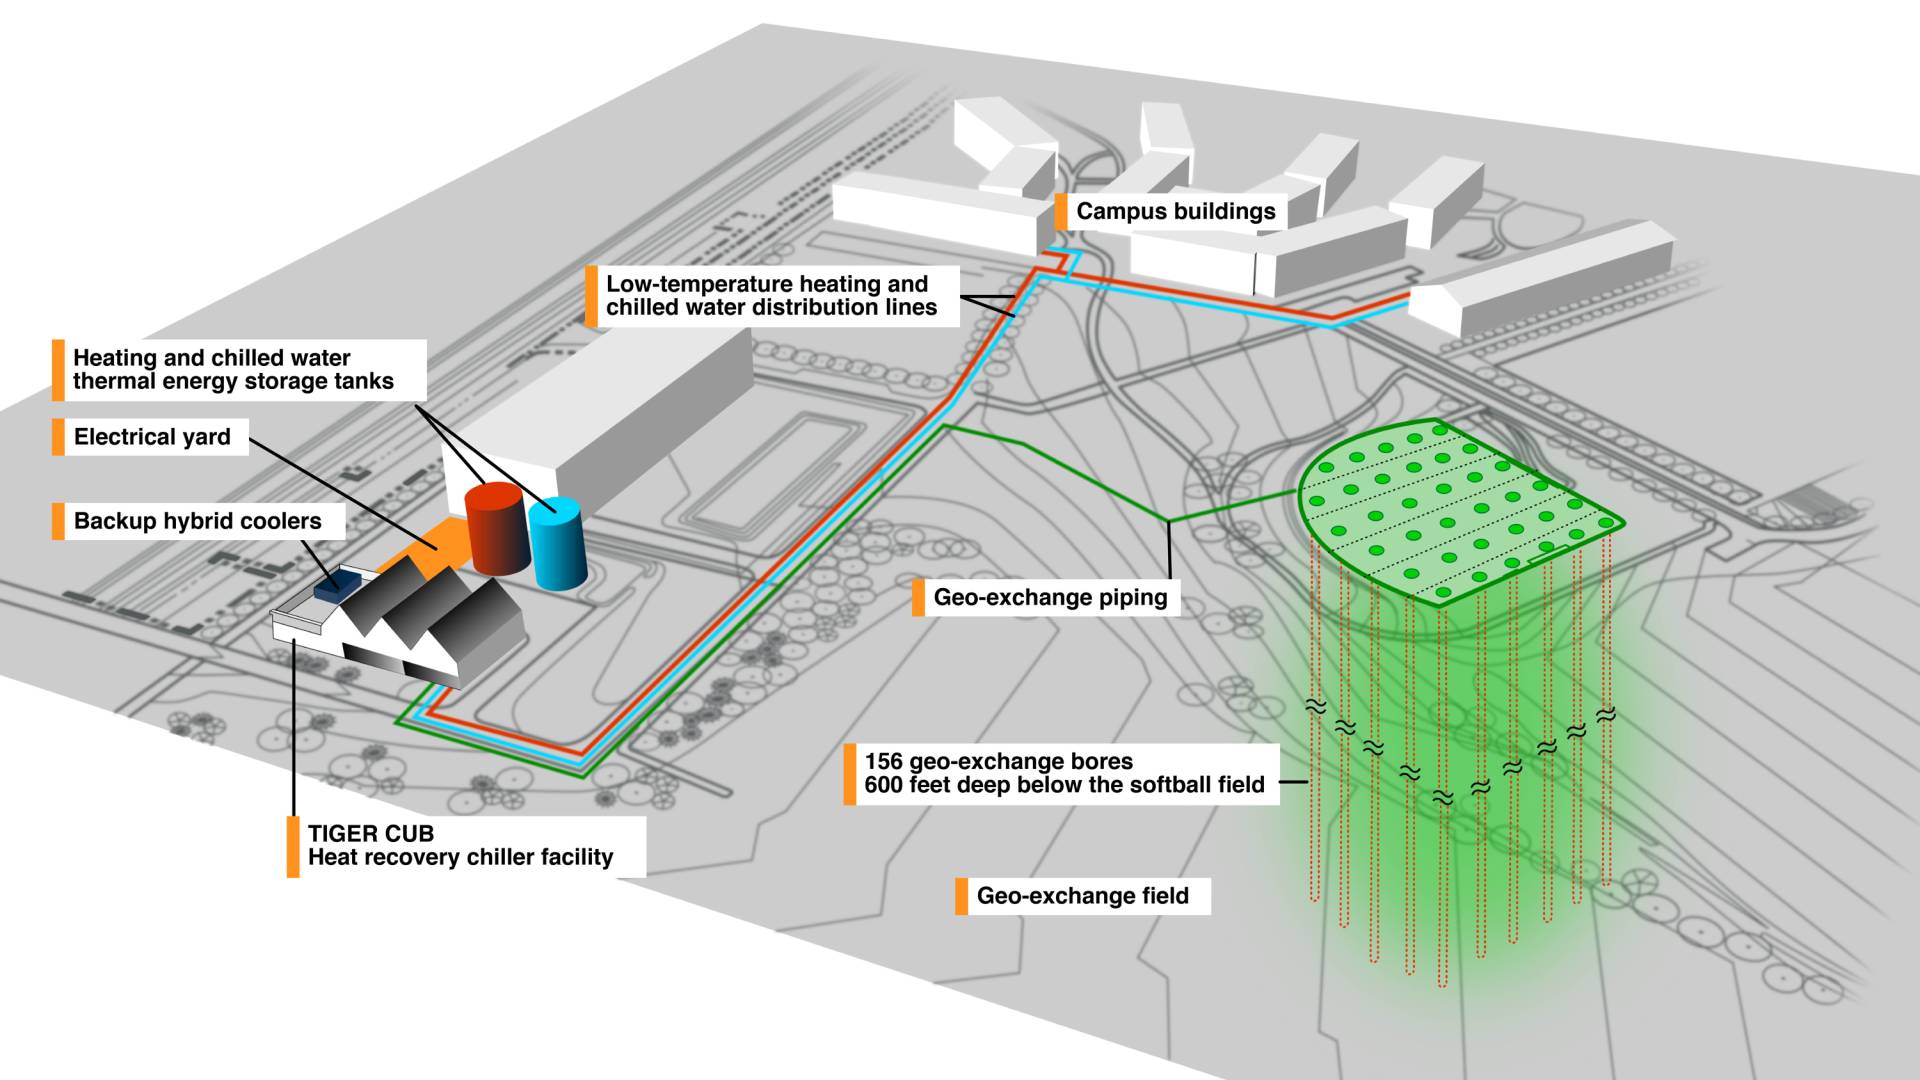 Schematic of Geo-Exchange system planned for campus